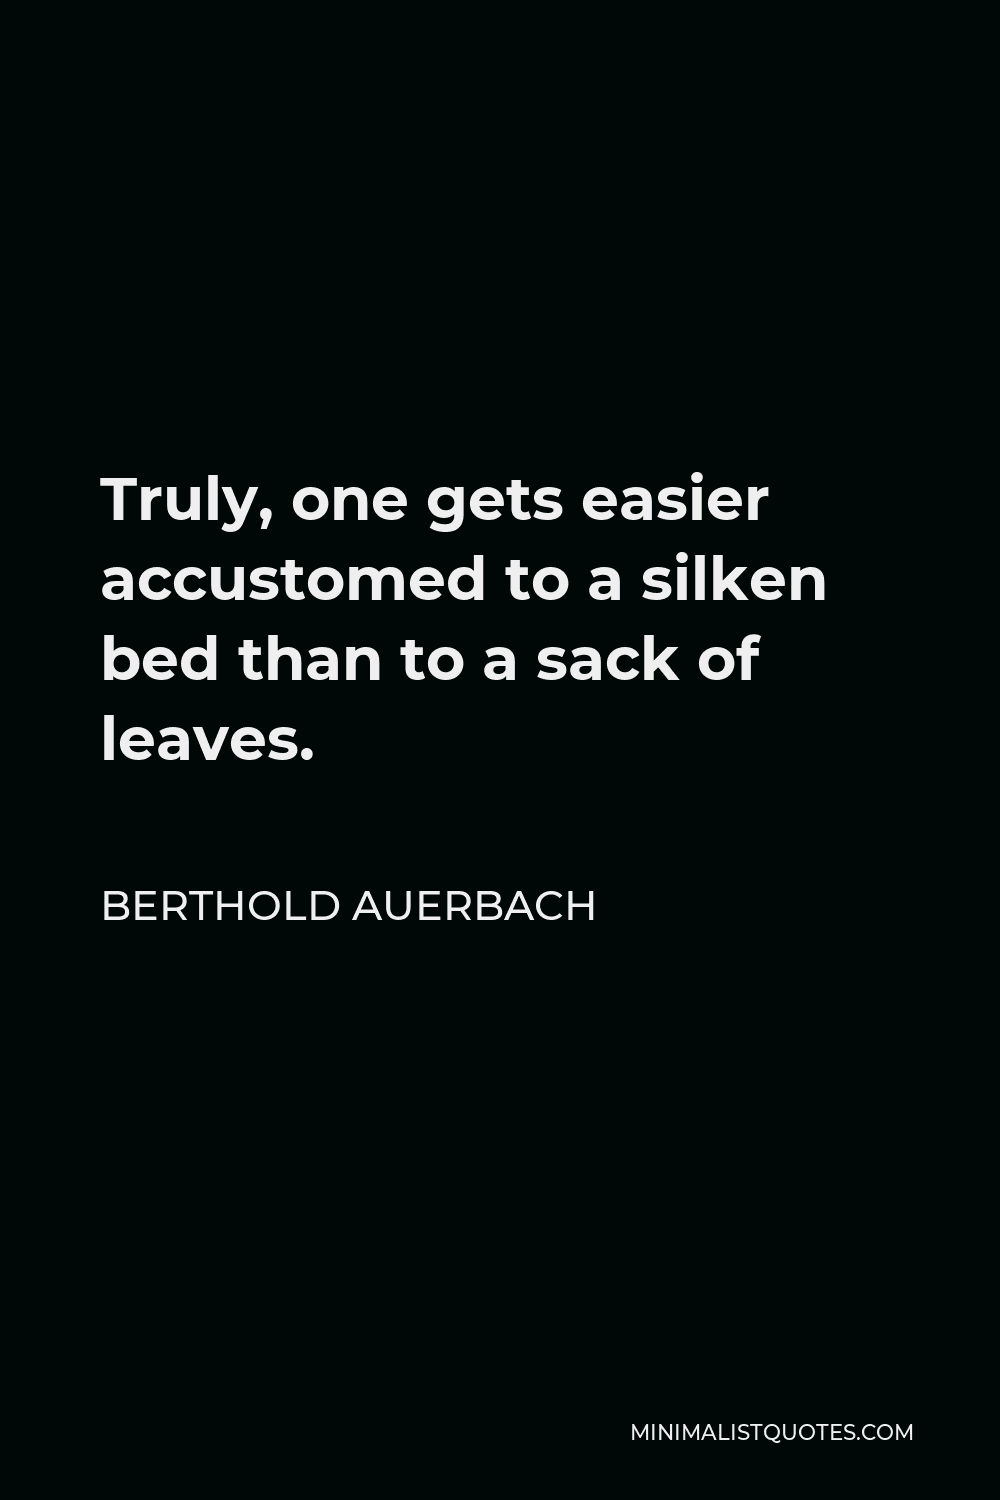 Berthold Auerbach Quote - Truly, one gets easier accustomed to a silken bed than to a sack of leaves.